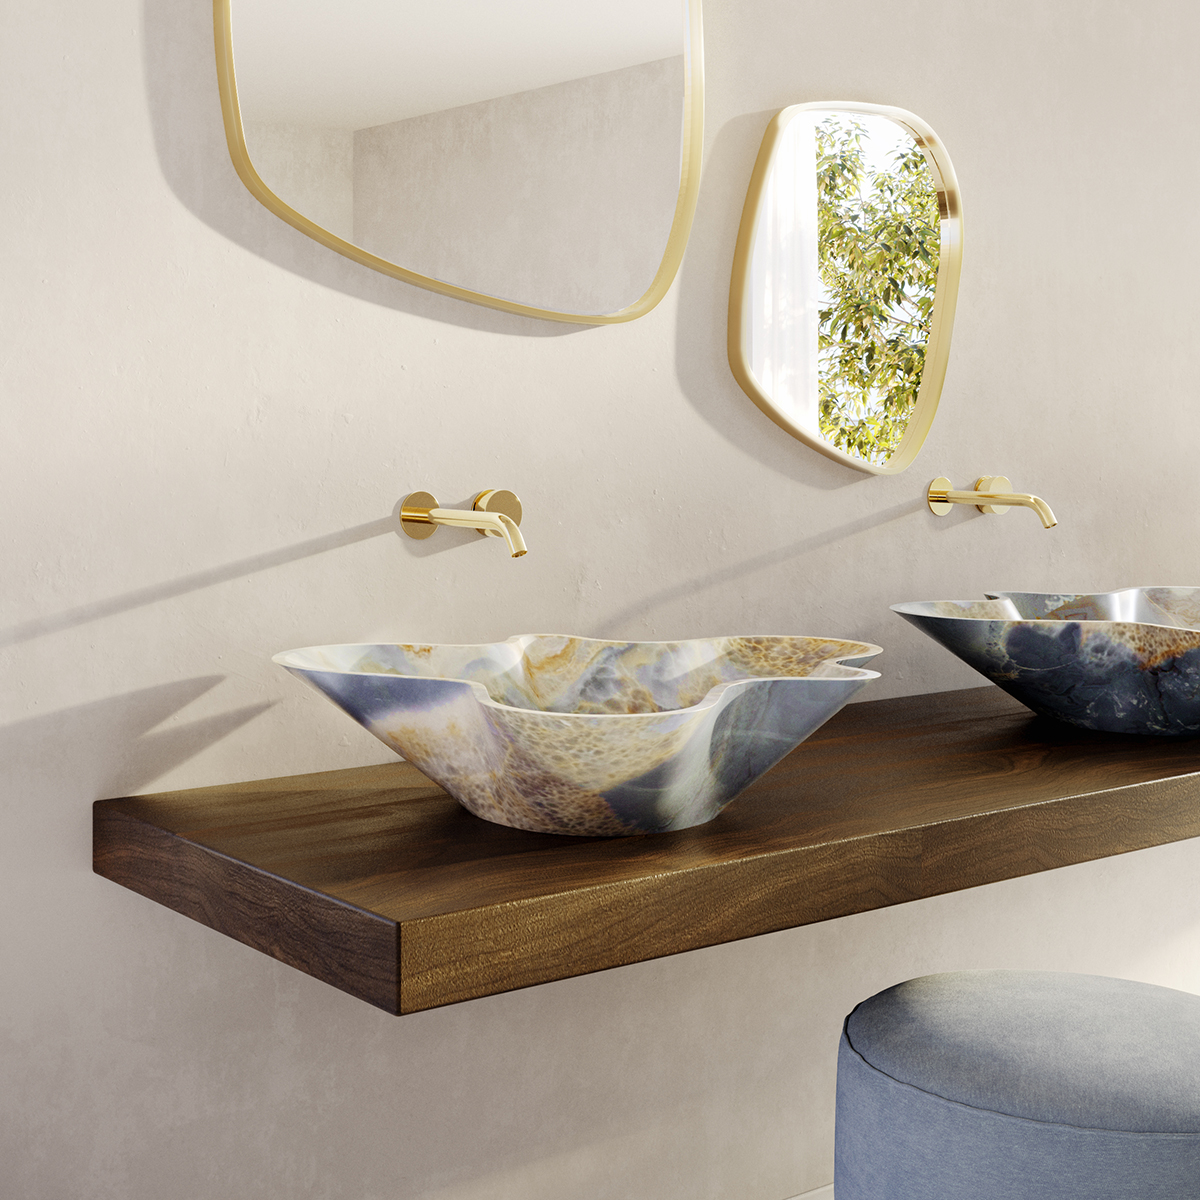 Nahbi basin collection by Kreoo for West One Bathrooms